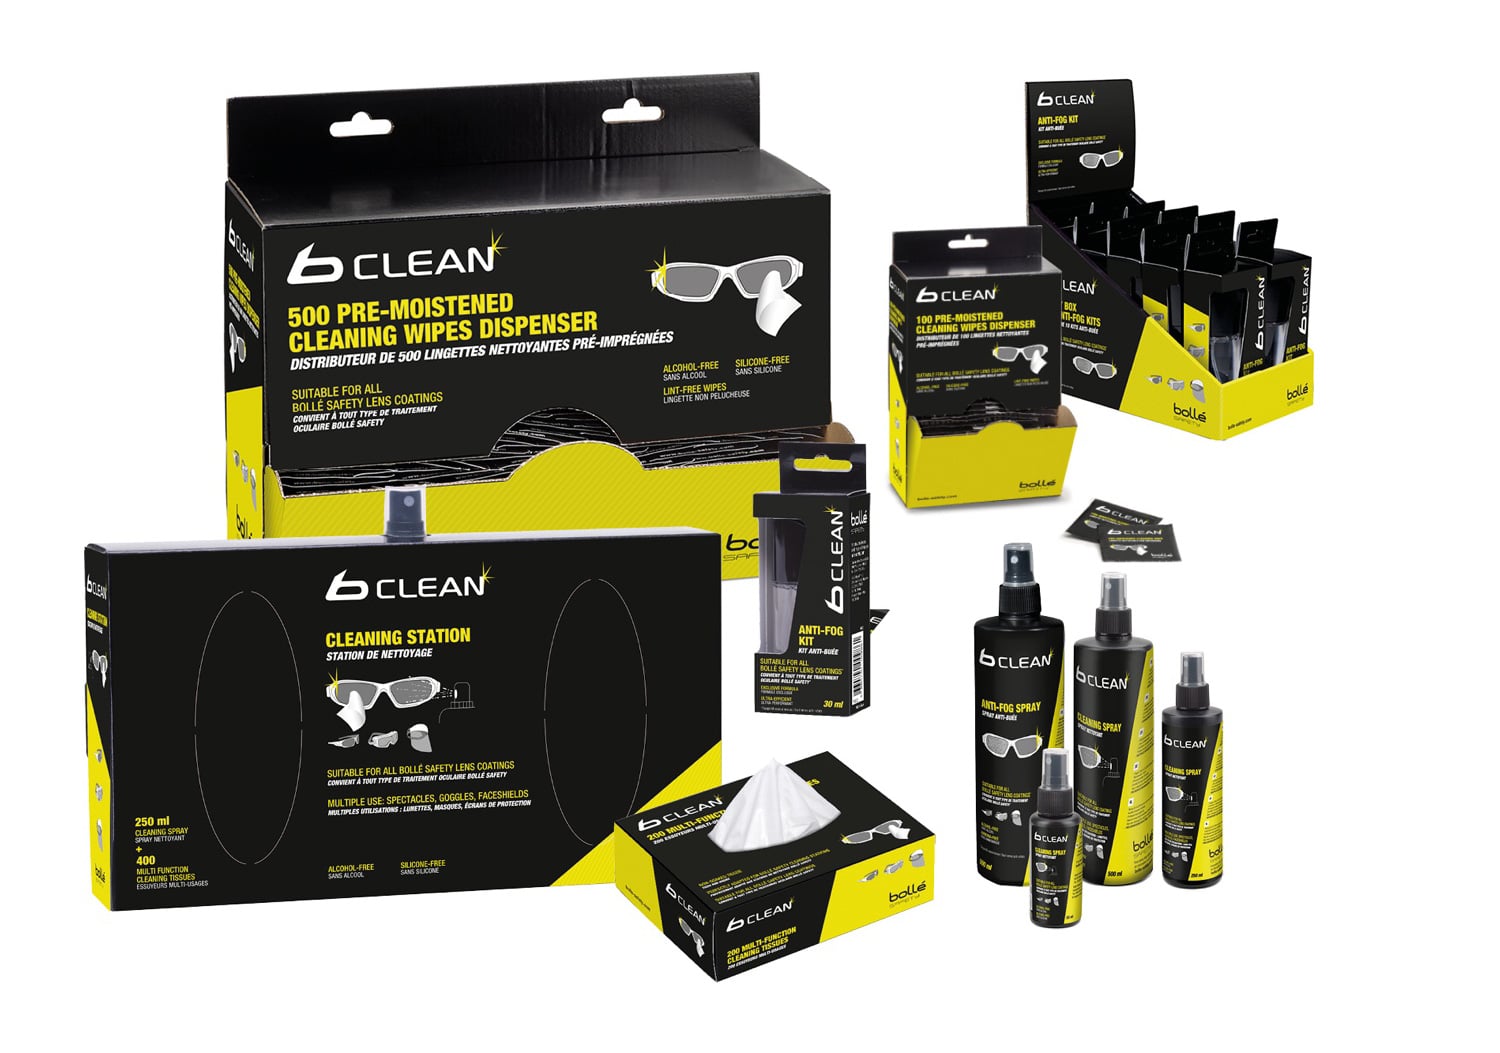 As shown here, the Bolle B-Clean cleaning kits. These were developed by the company to maintain the eye pro in top condition.